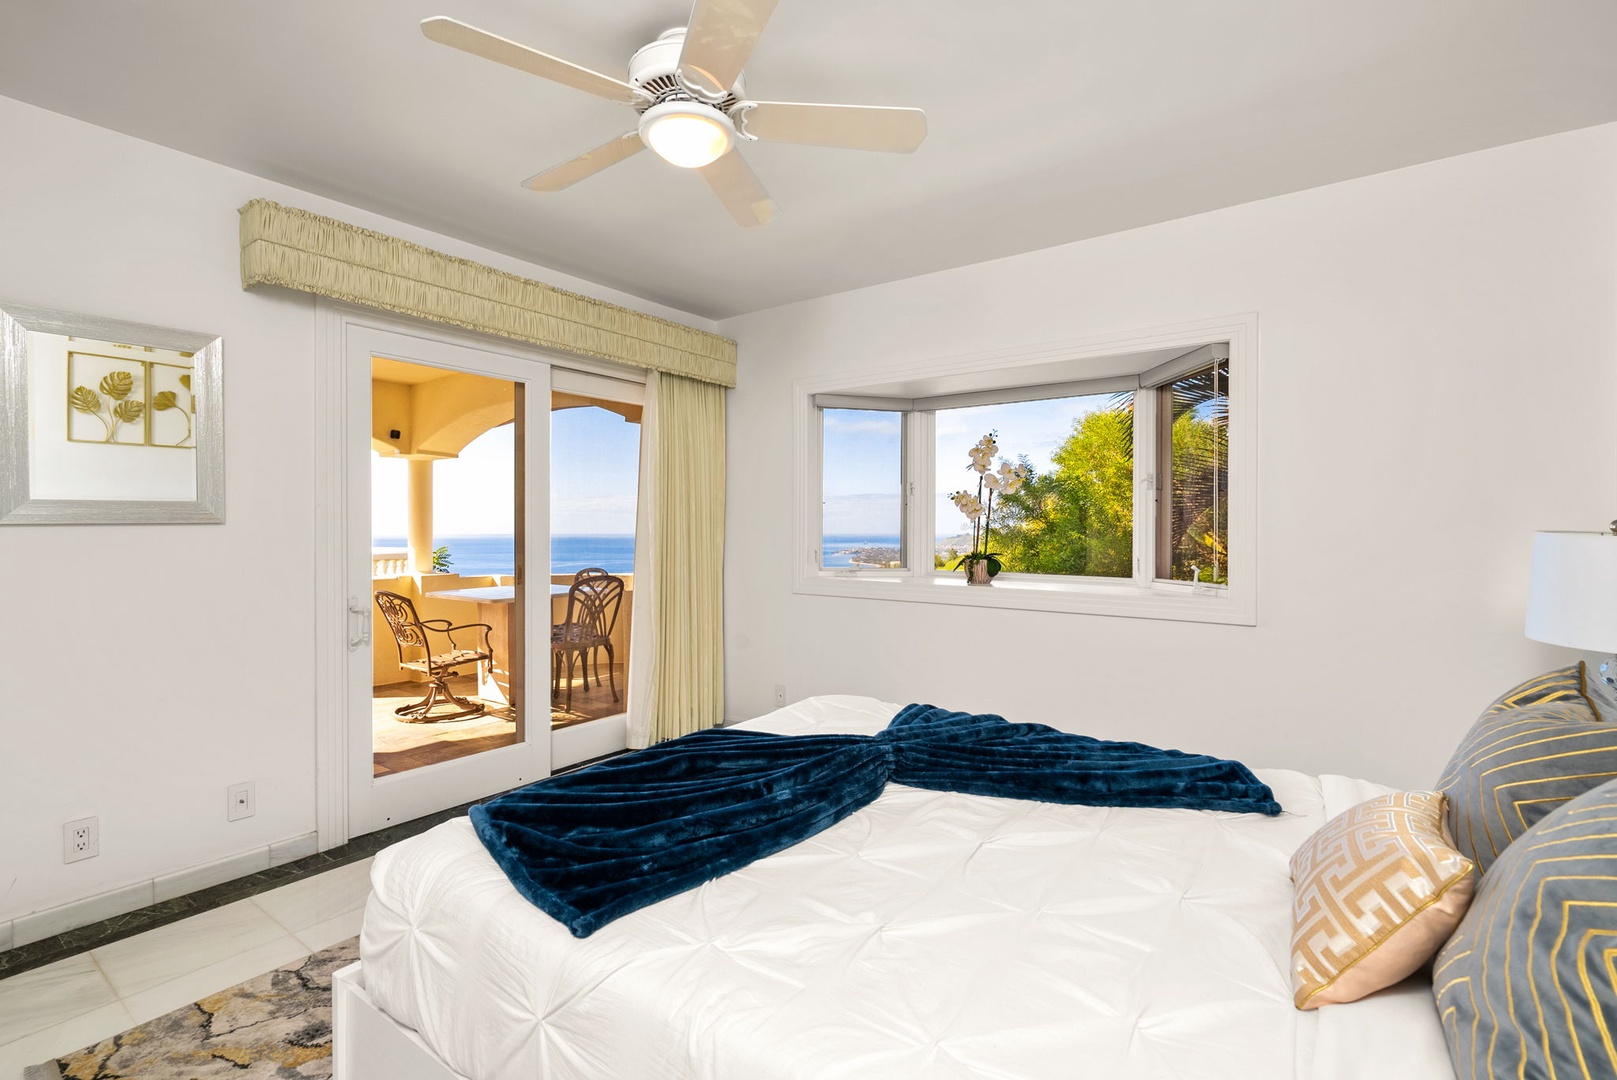 Honolulu Vacation Rentals, Hawaii Ridge Getaway - Bright and airy ambiance in the guest bedroom.